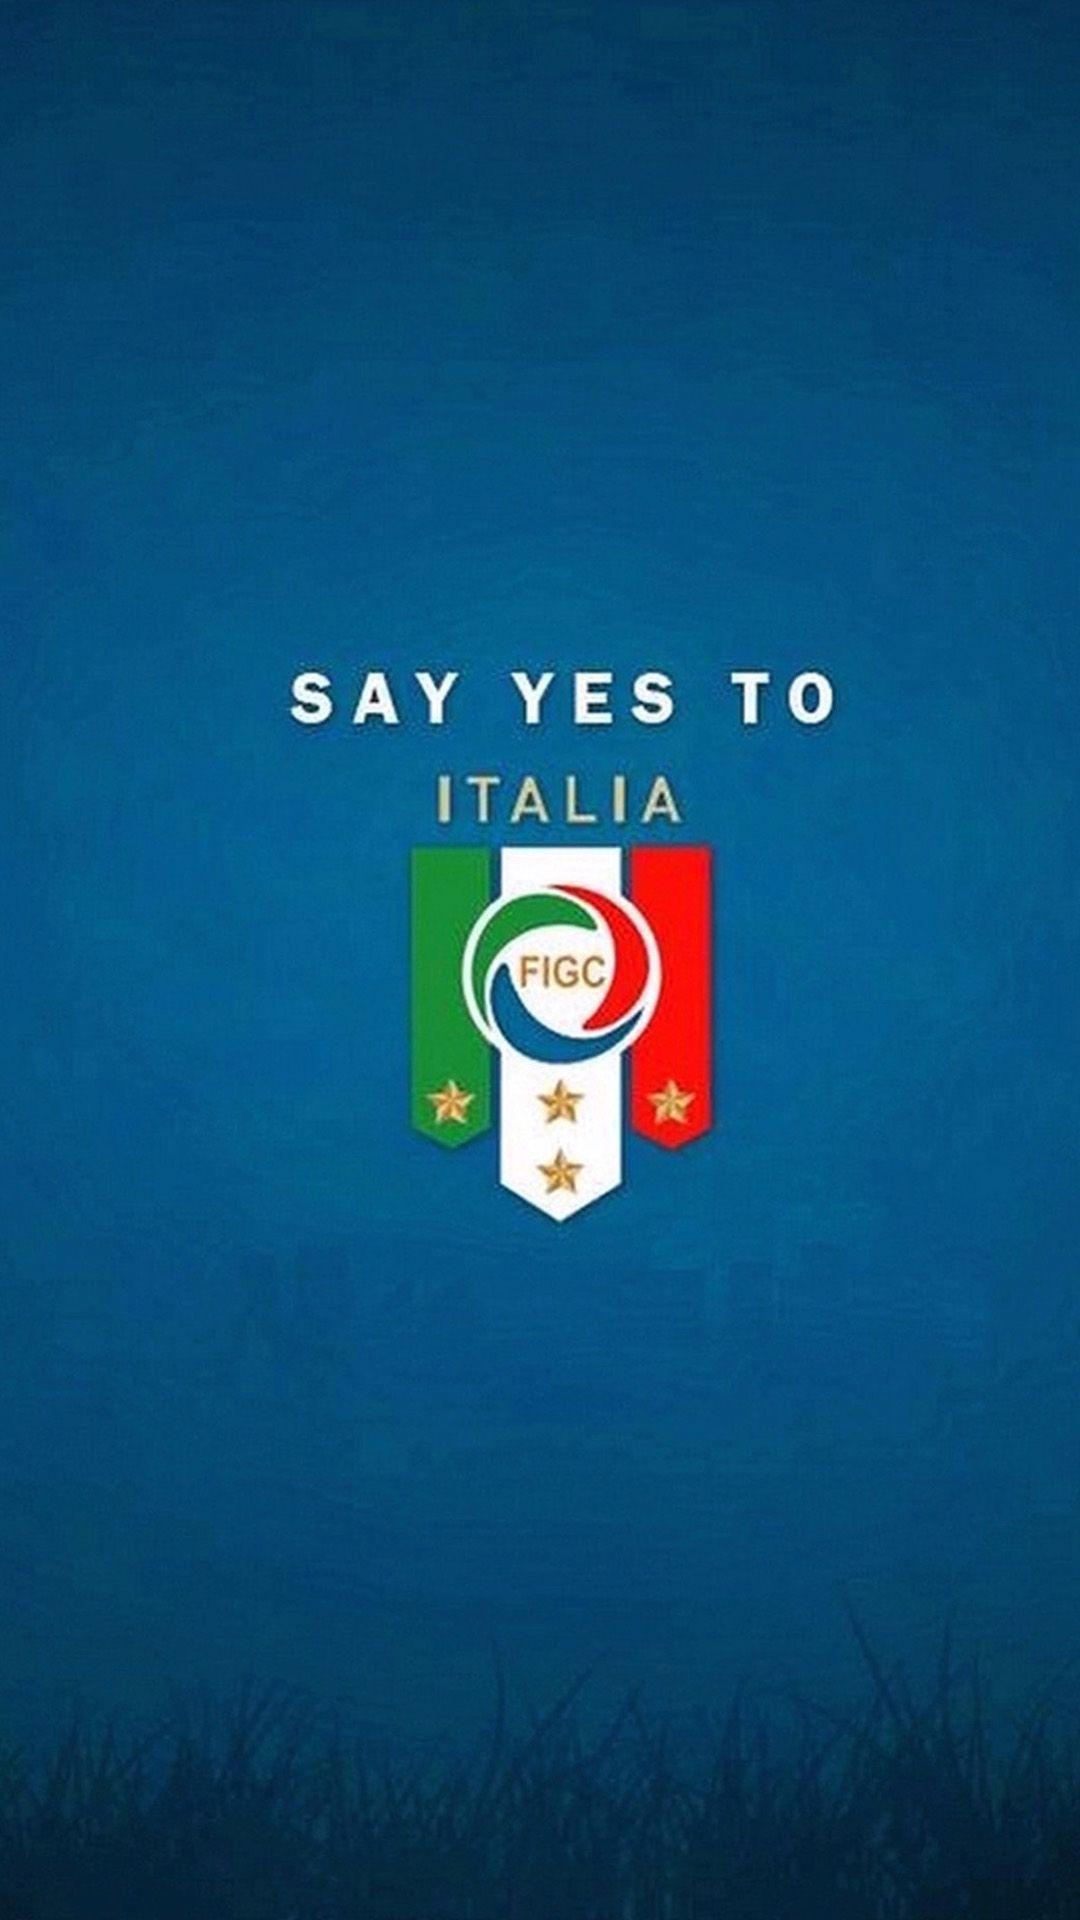 SAY YES TO ITALIA Htc One M8 htc one wallpaper